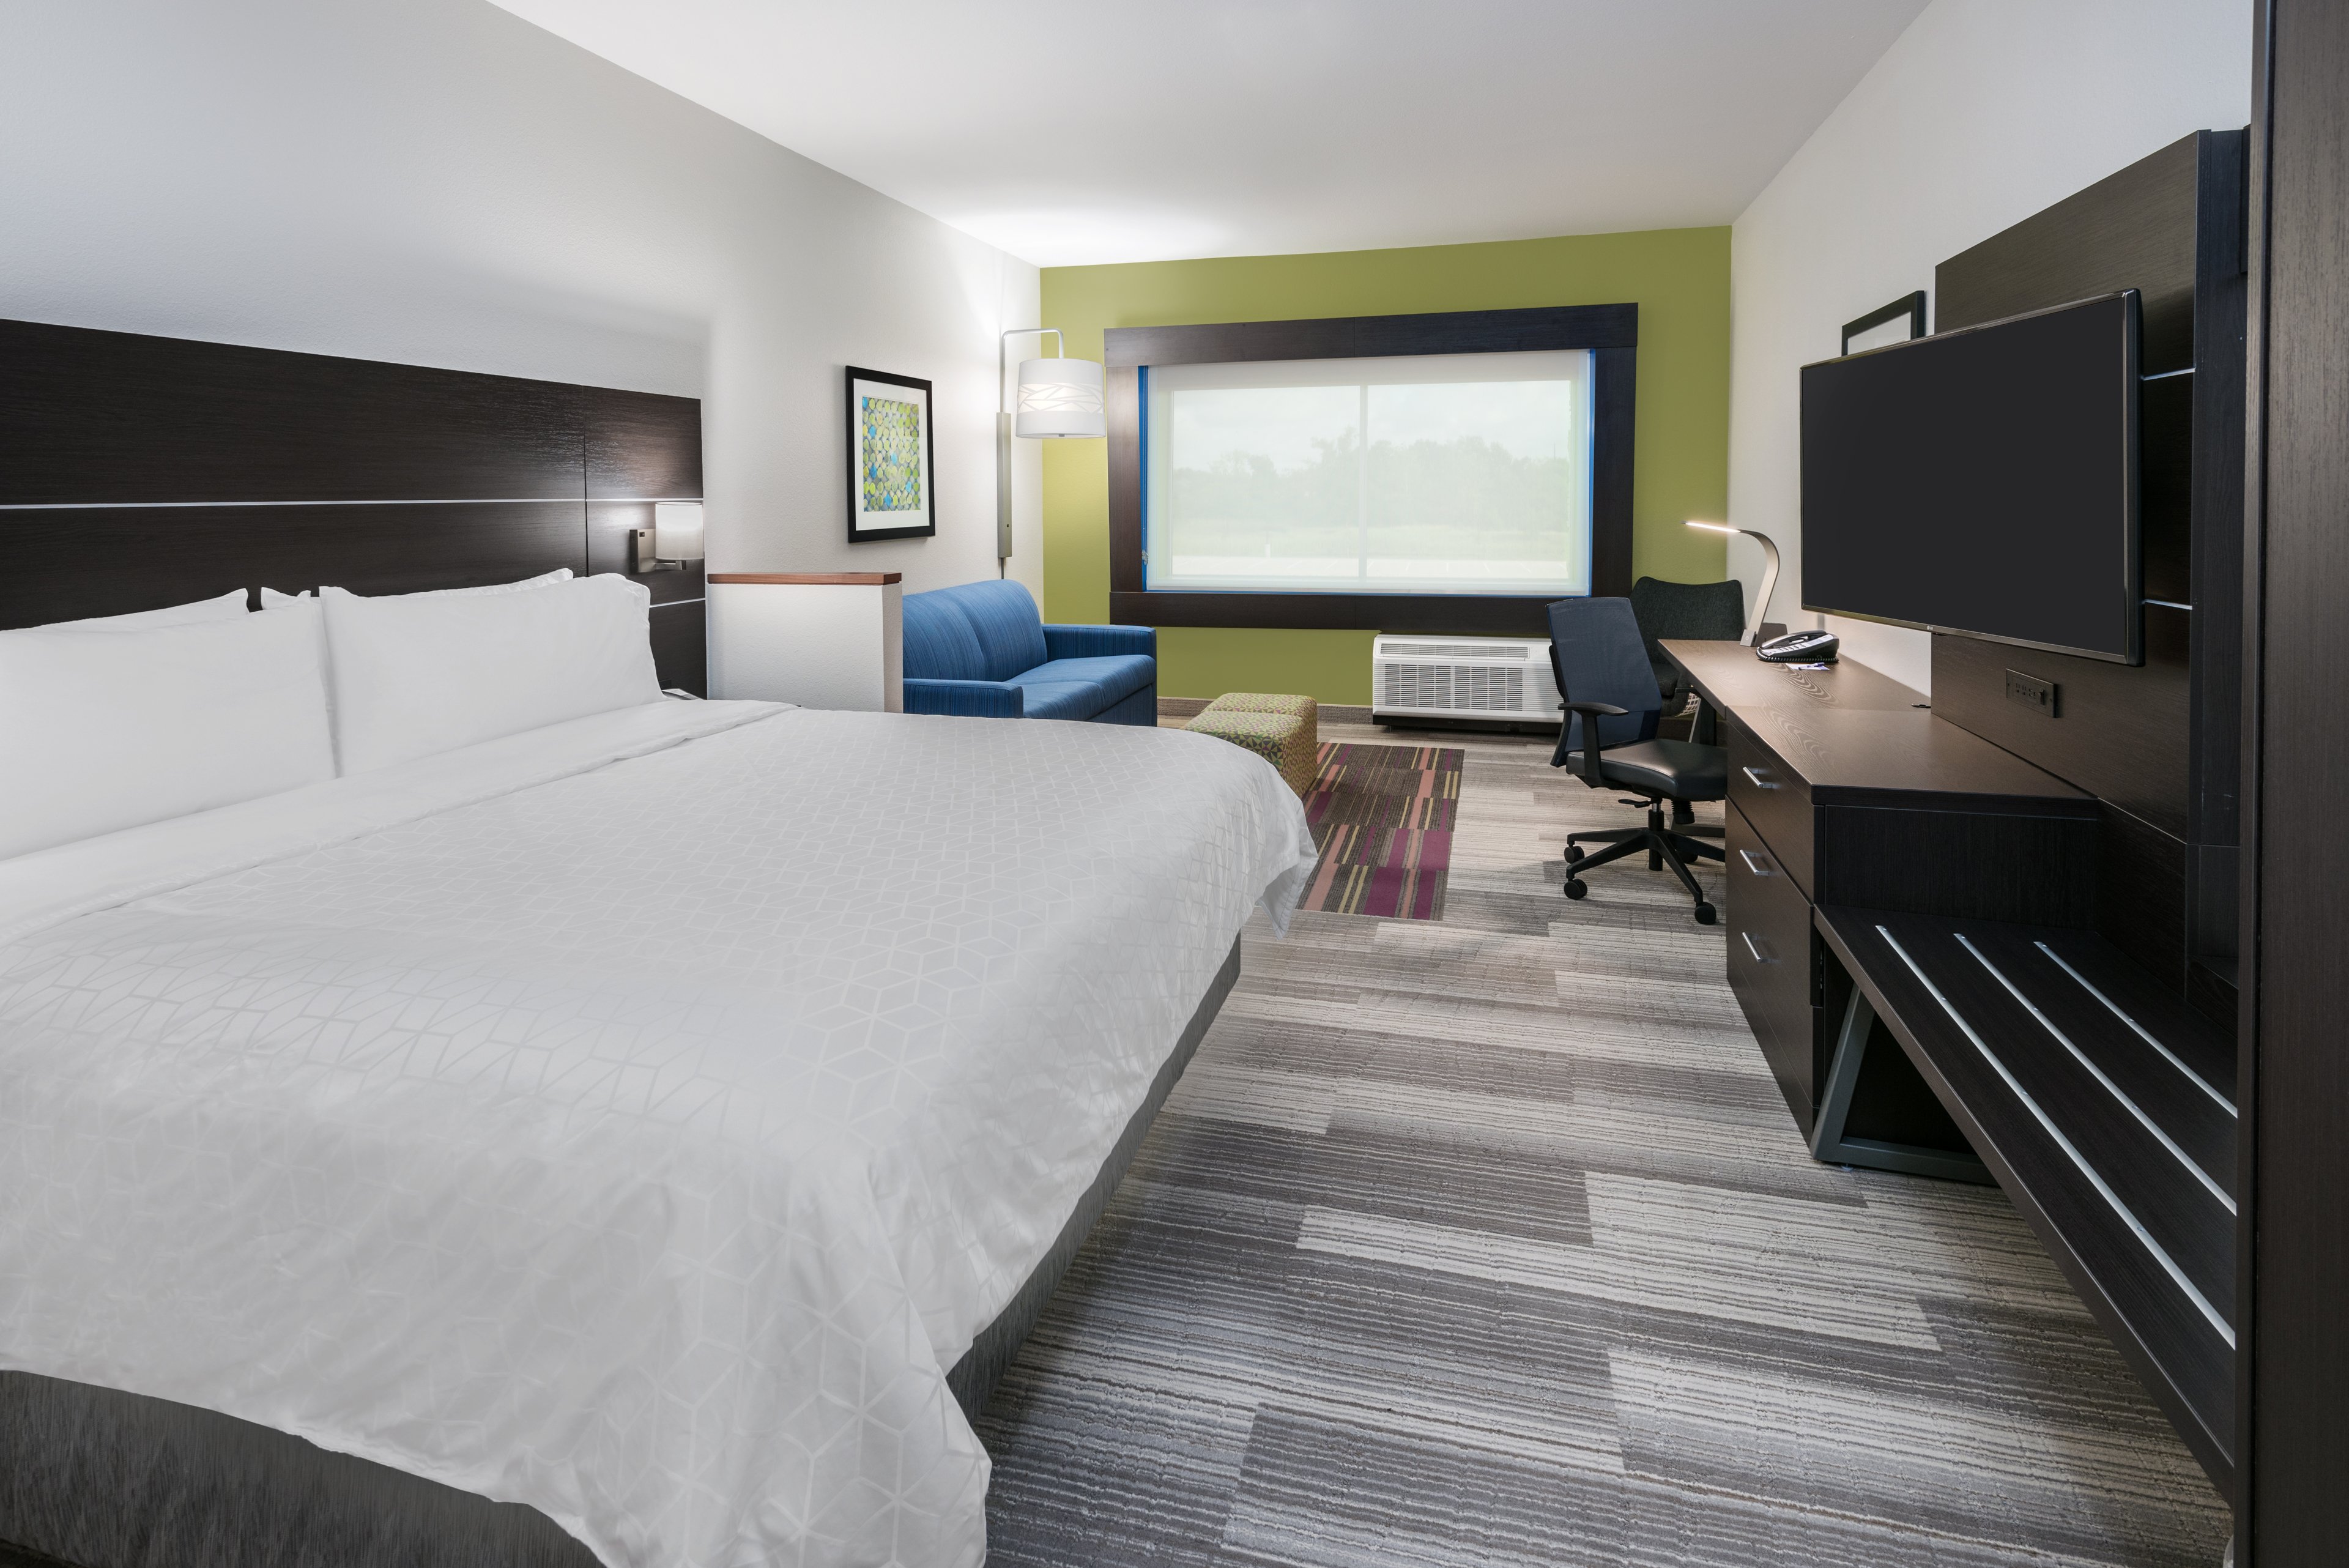 Our College Station hotel offers large rooms w/ separate workspace